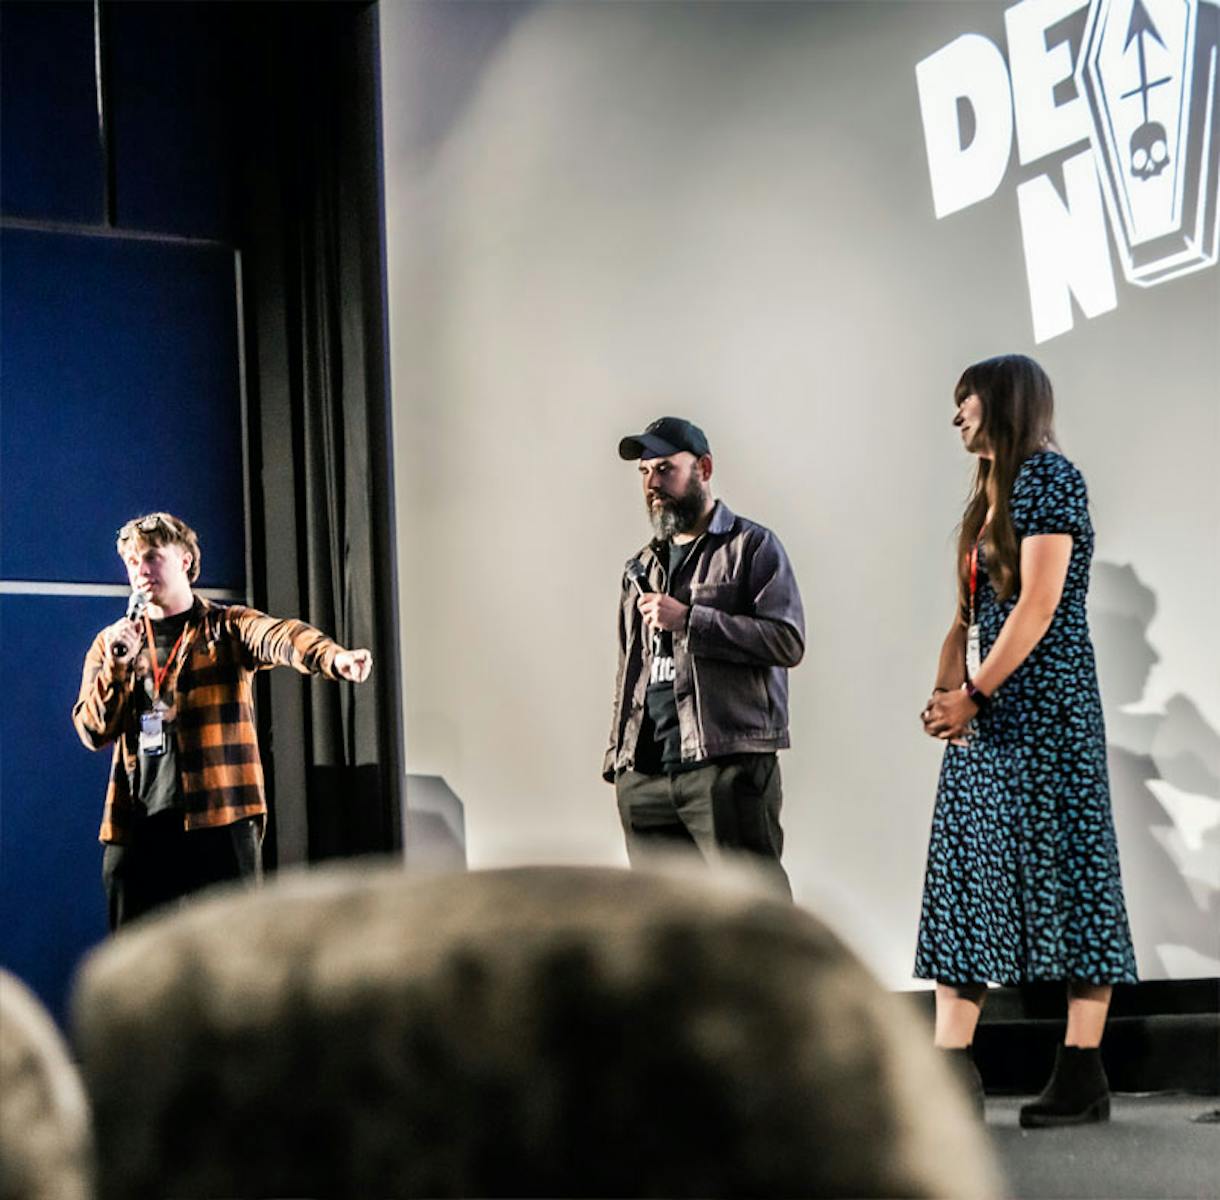 Live Q and A for Screening of Eating Miss Campbell with Liam Regan, Lyndsey Craine and Danny Naylor at Dead Northern 2022